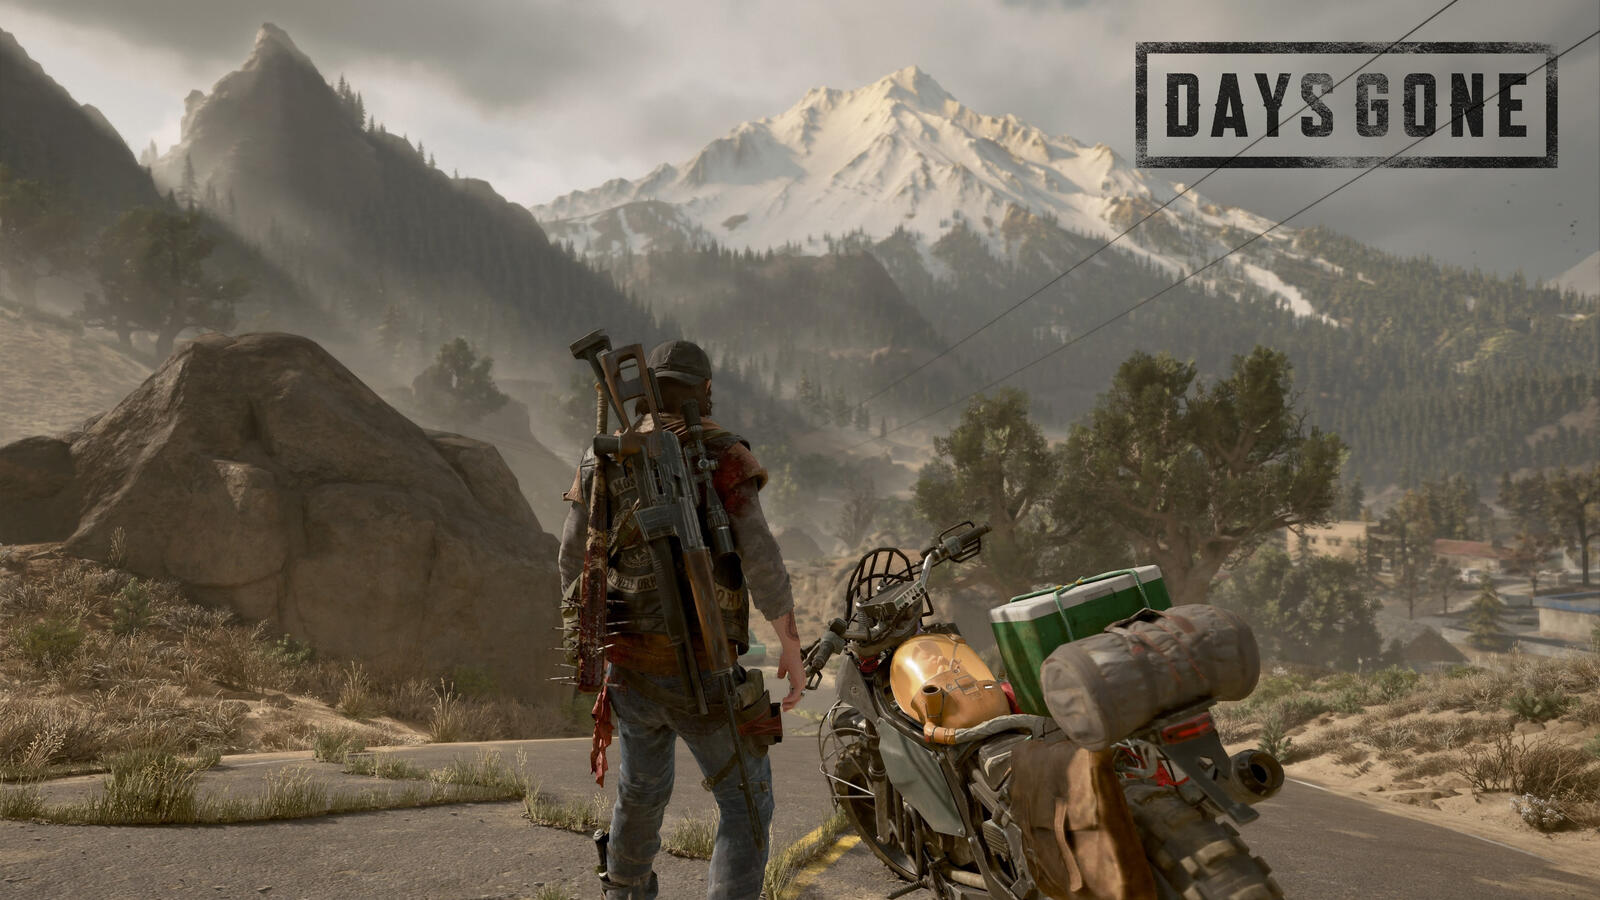 Wallpapers games days gone 2021 games on the desktop